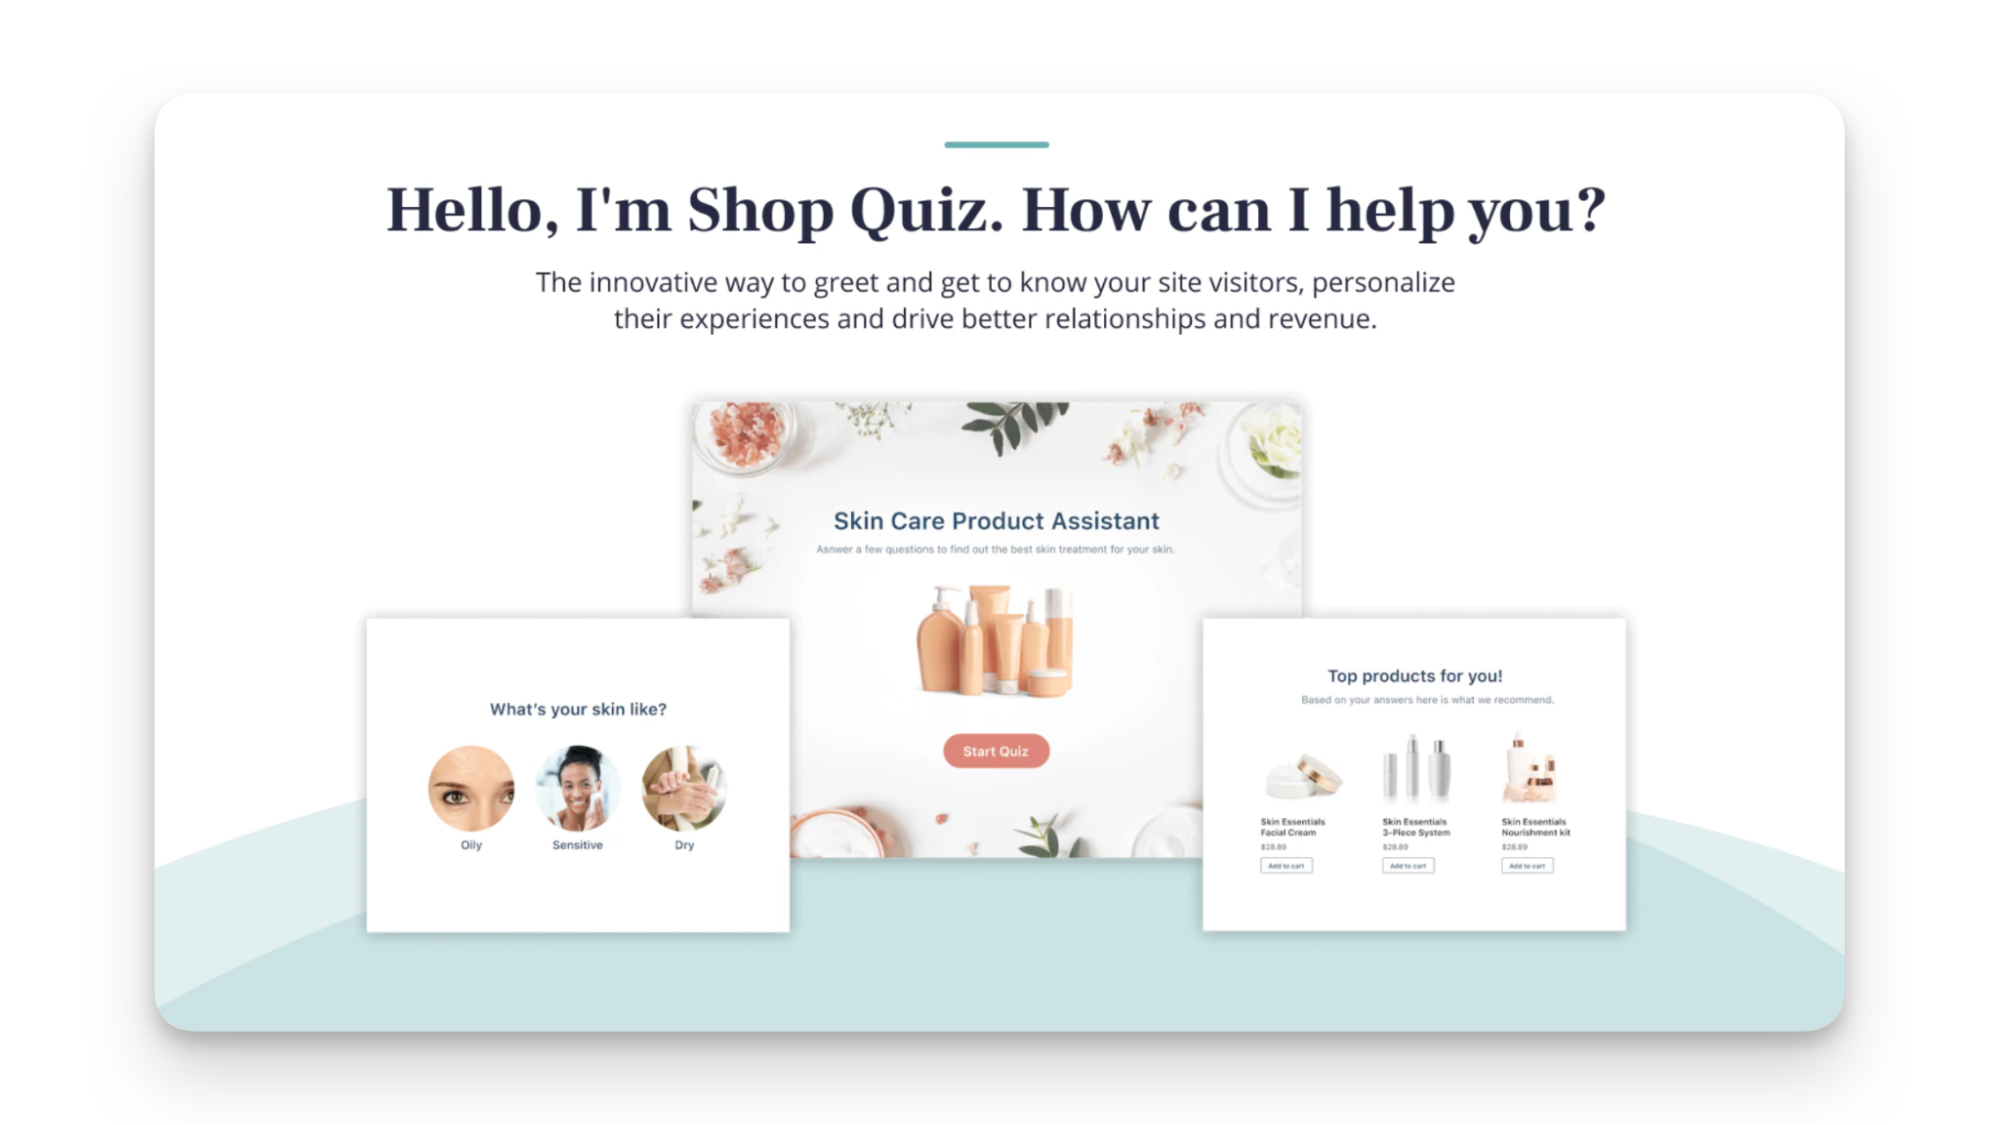 The 'Shop Quiz' website offers personalized skin care product recommendations.